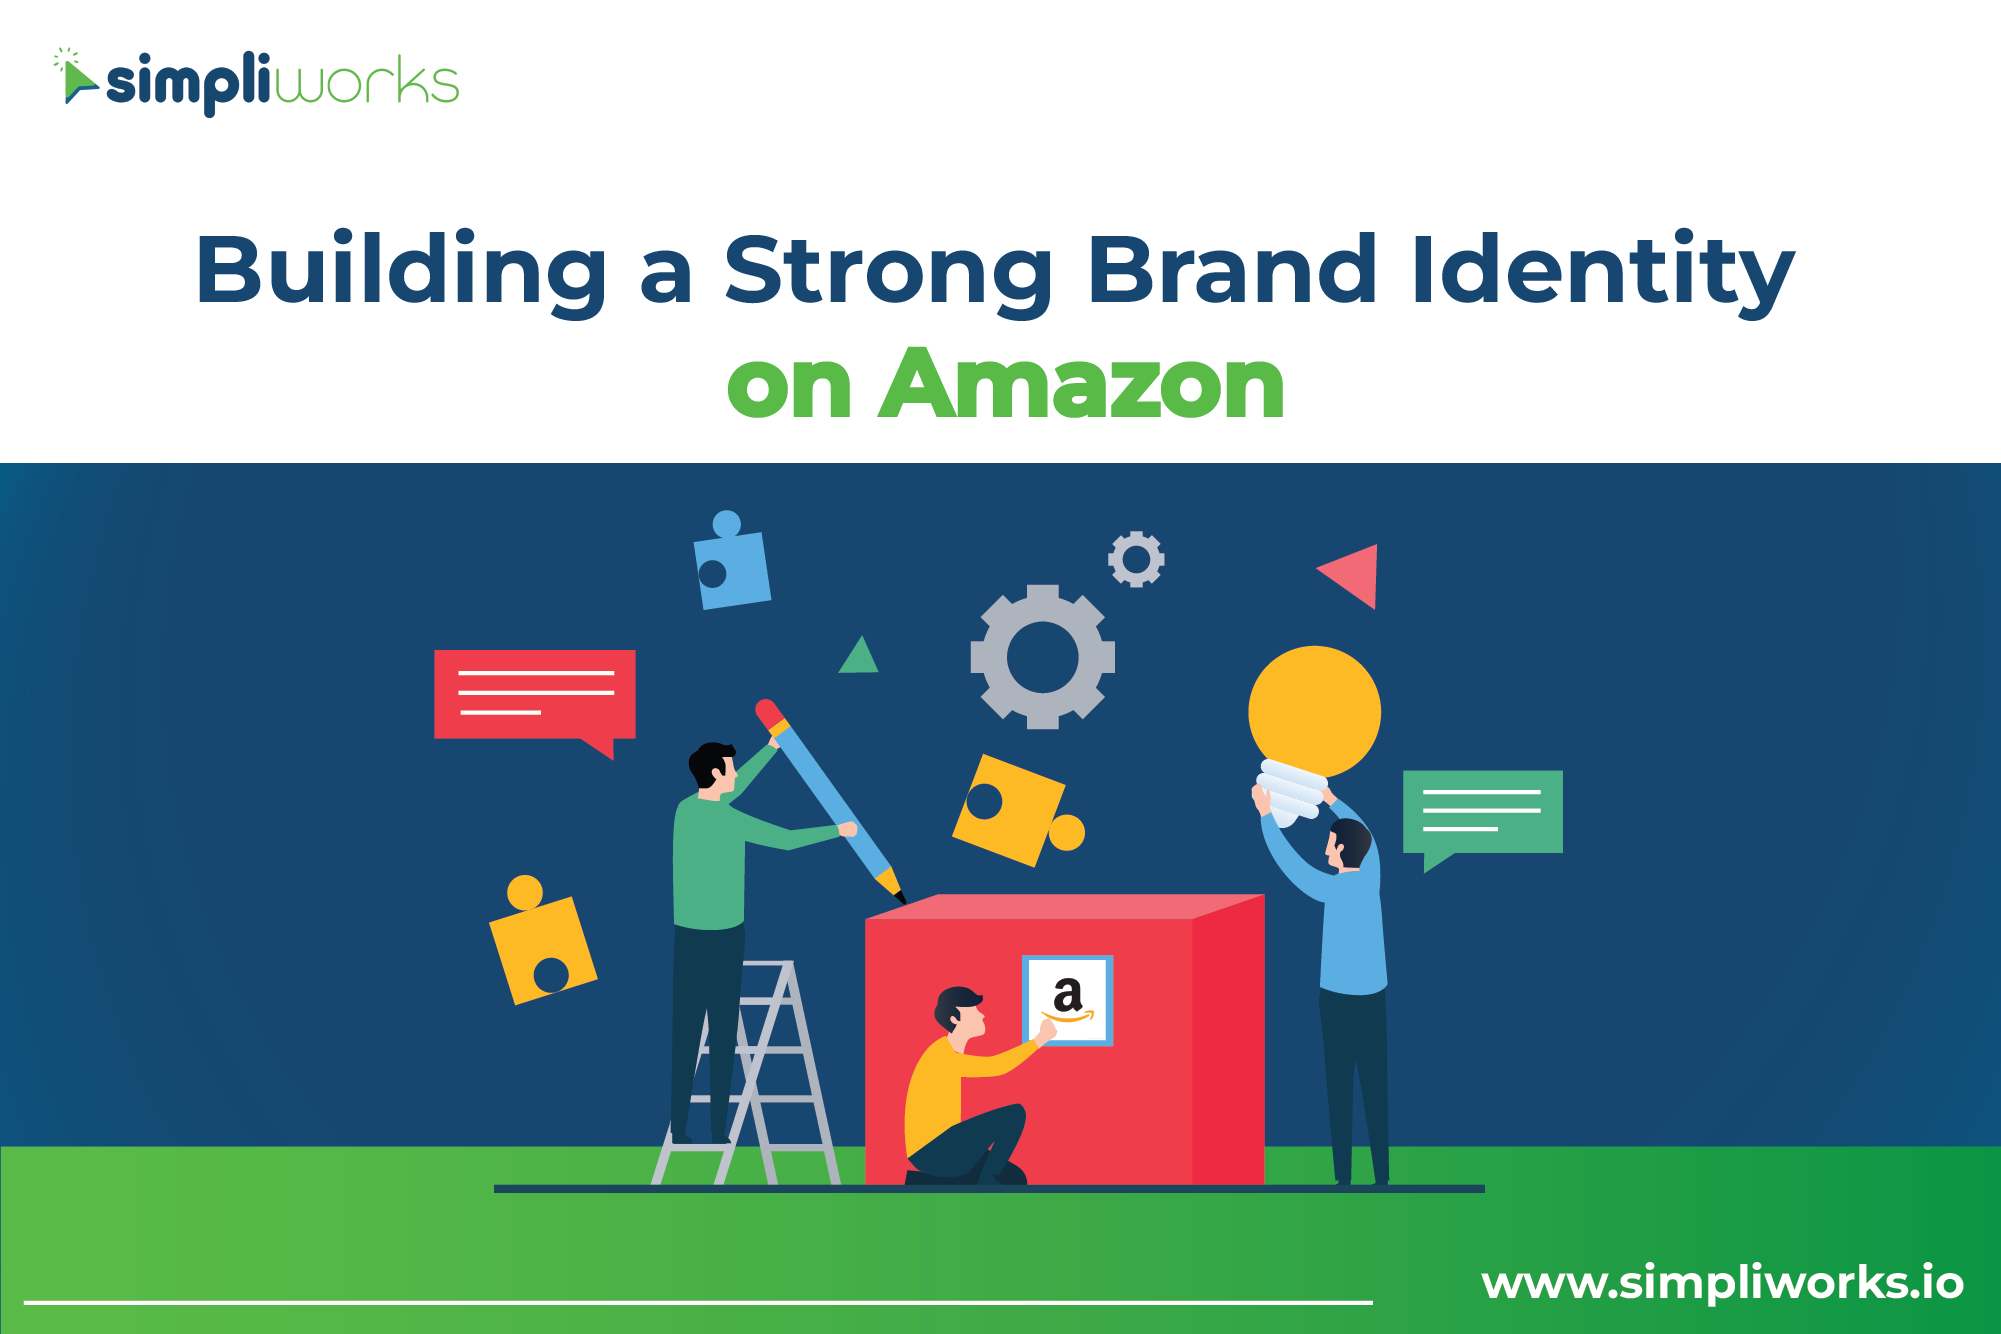 Building a Strong Brand Identity (1)